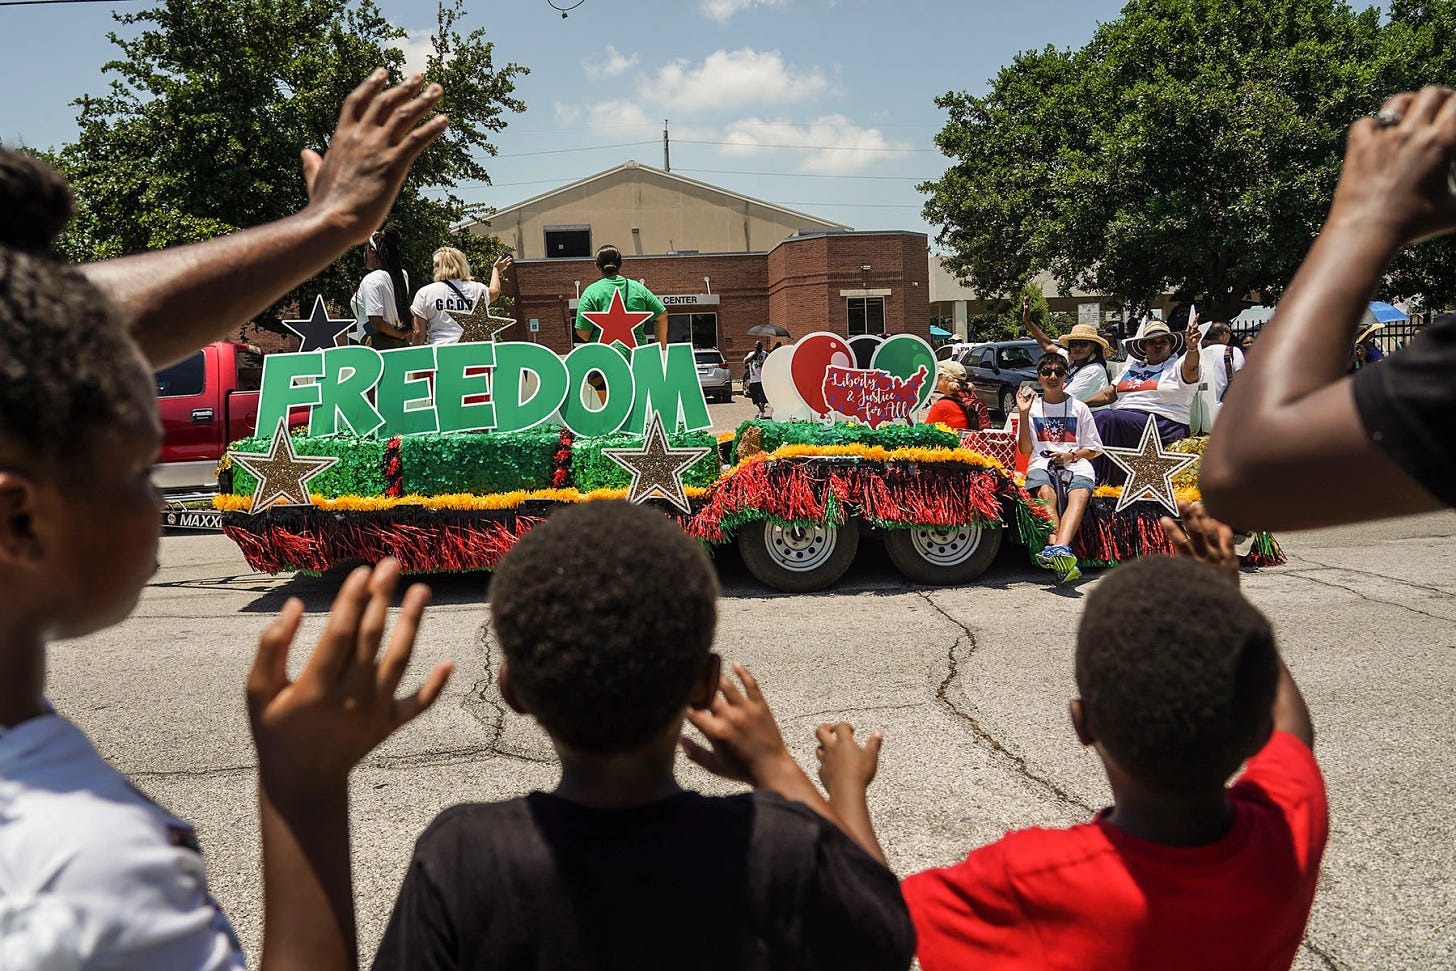 A photo of kids watching a Juneteenth parade. There is one float going by in the photo, which features green, red, and yellow decorations and says “FREEDOM” in big letters.